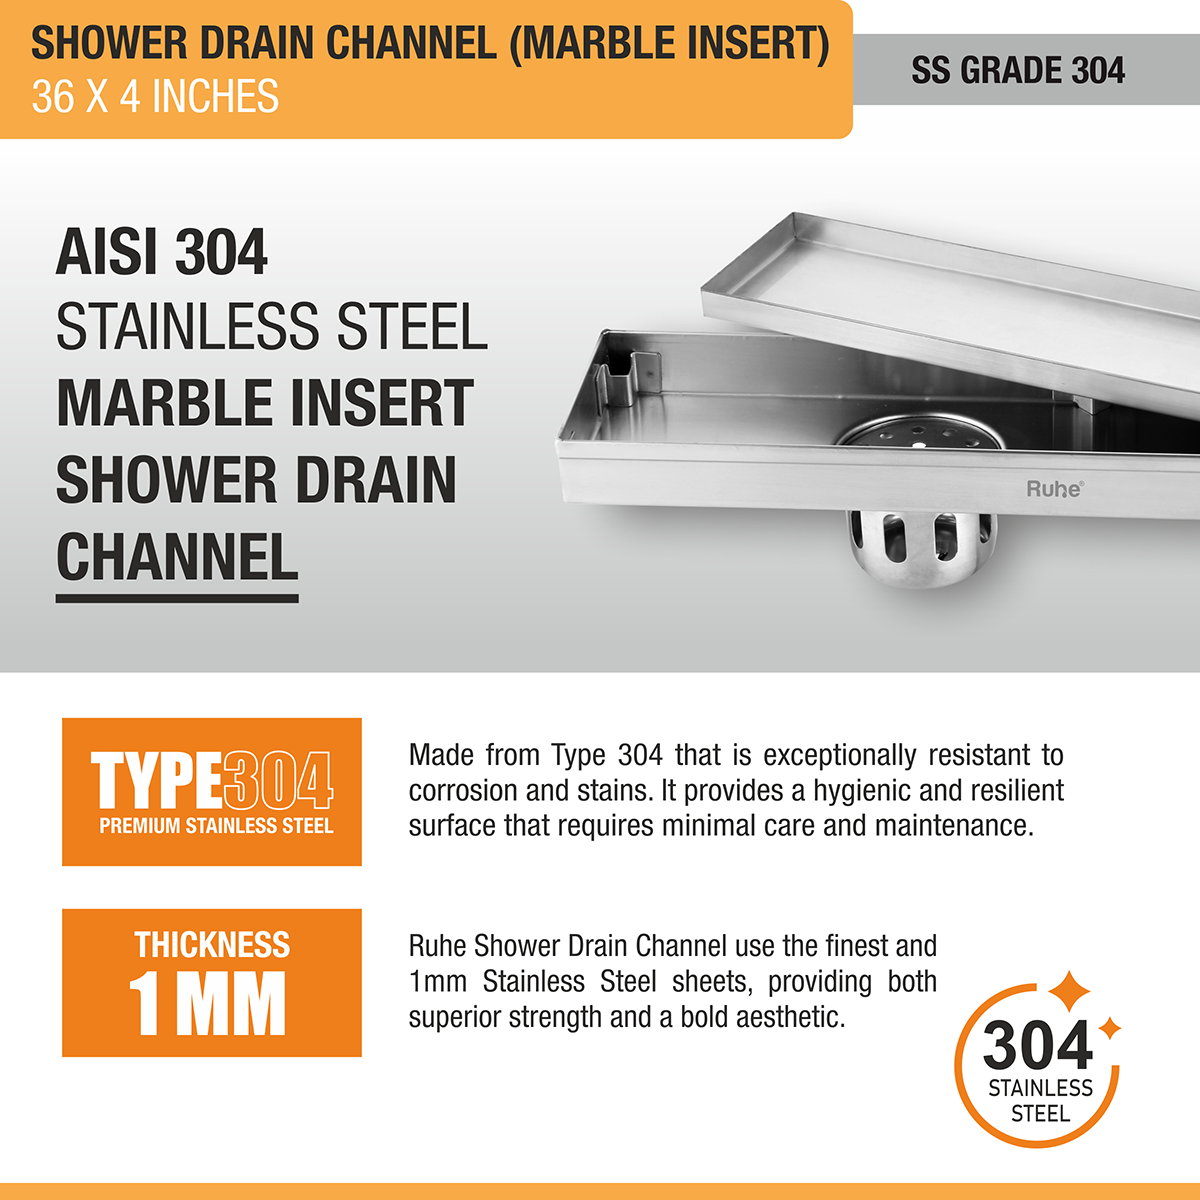 Marble Insert Shower Drain Channel (36 x 4 Inches) with Cockroach Trap (304 Grade) stainless steel